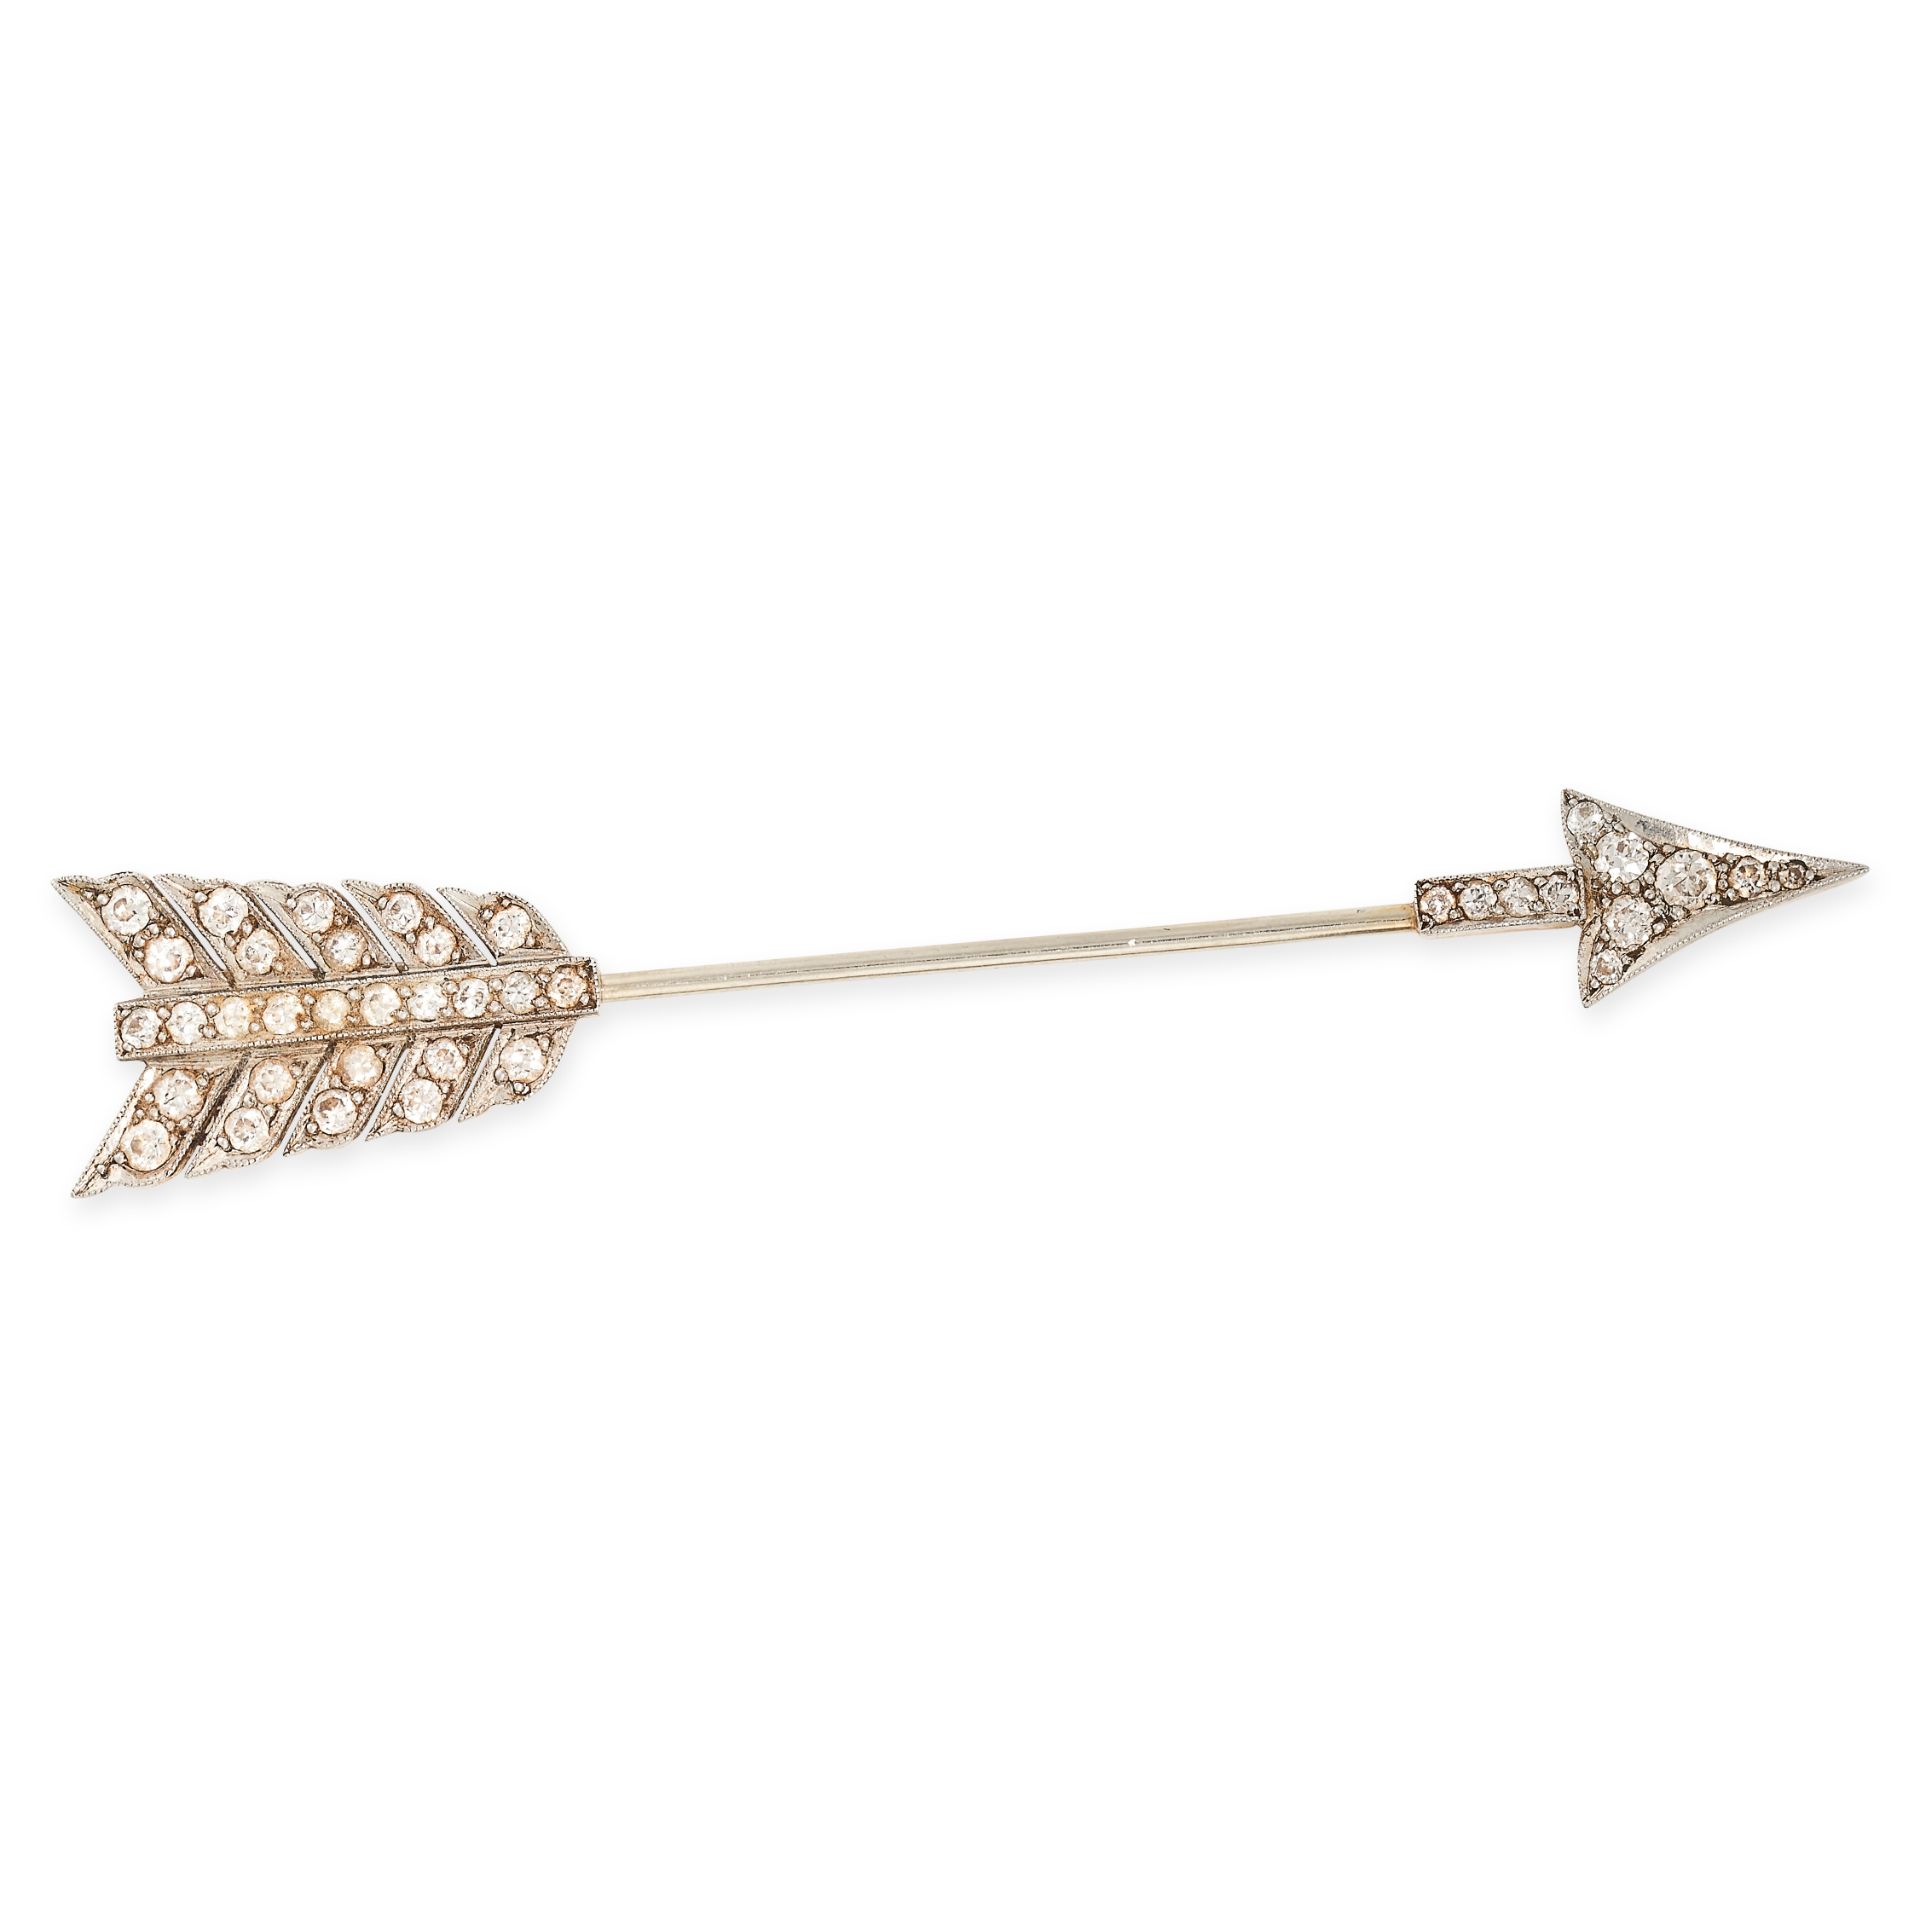 AN ART DECO DIAMOND ARROW JABOT PIN BROOCH in 15ct yellow gold and platinum, terminating at both